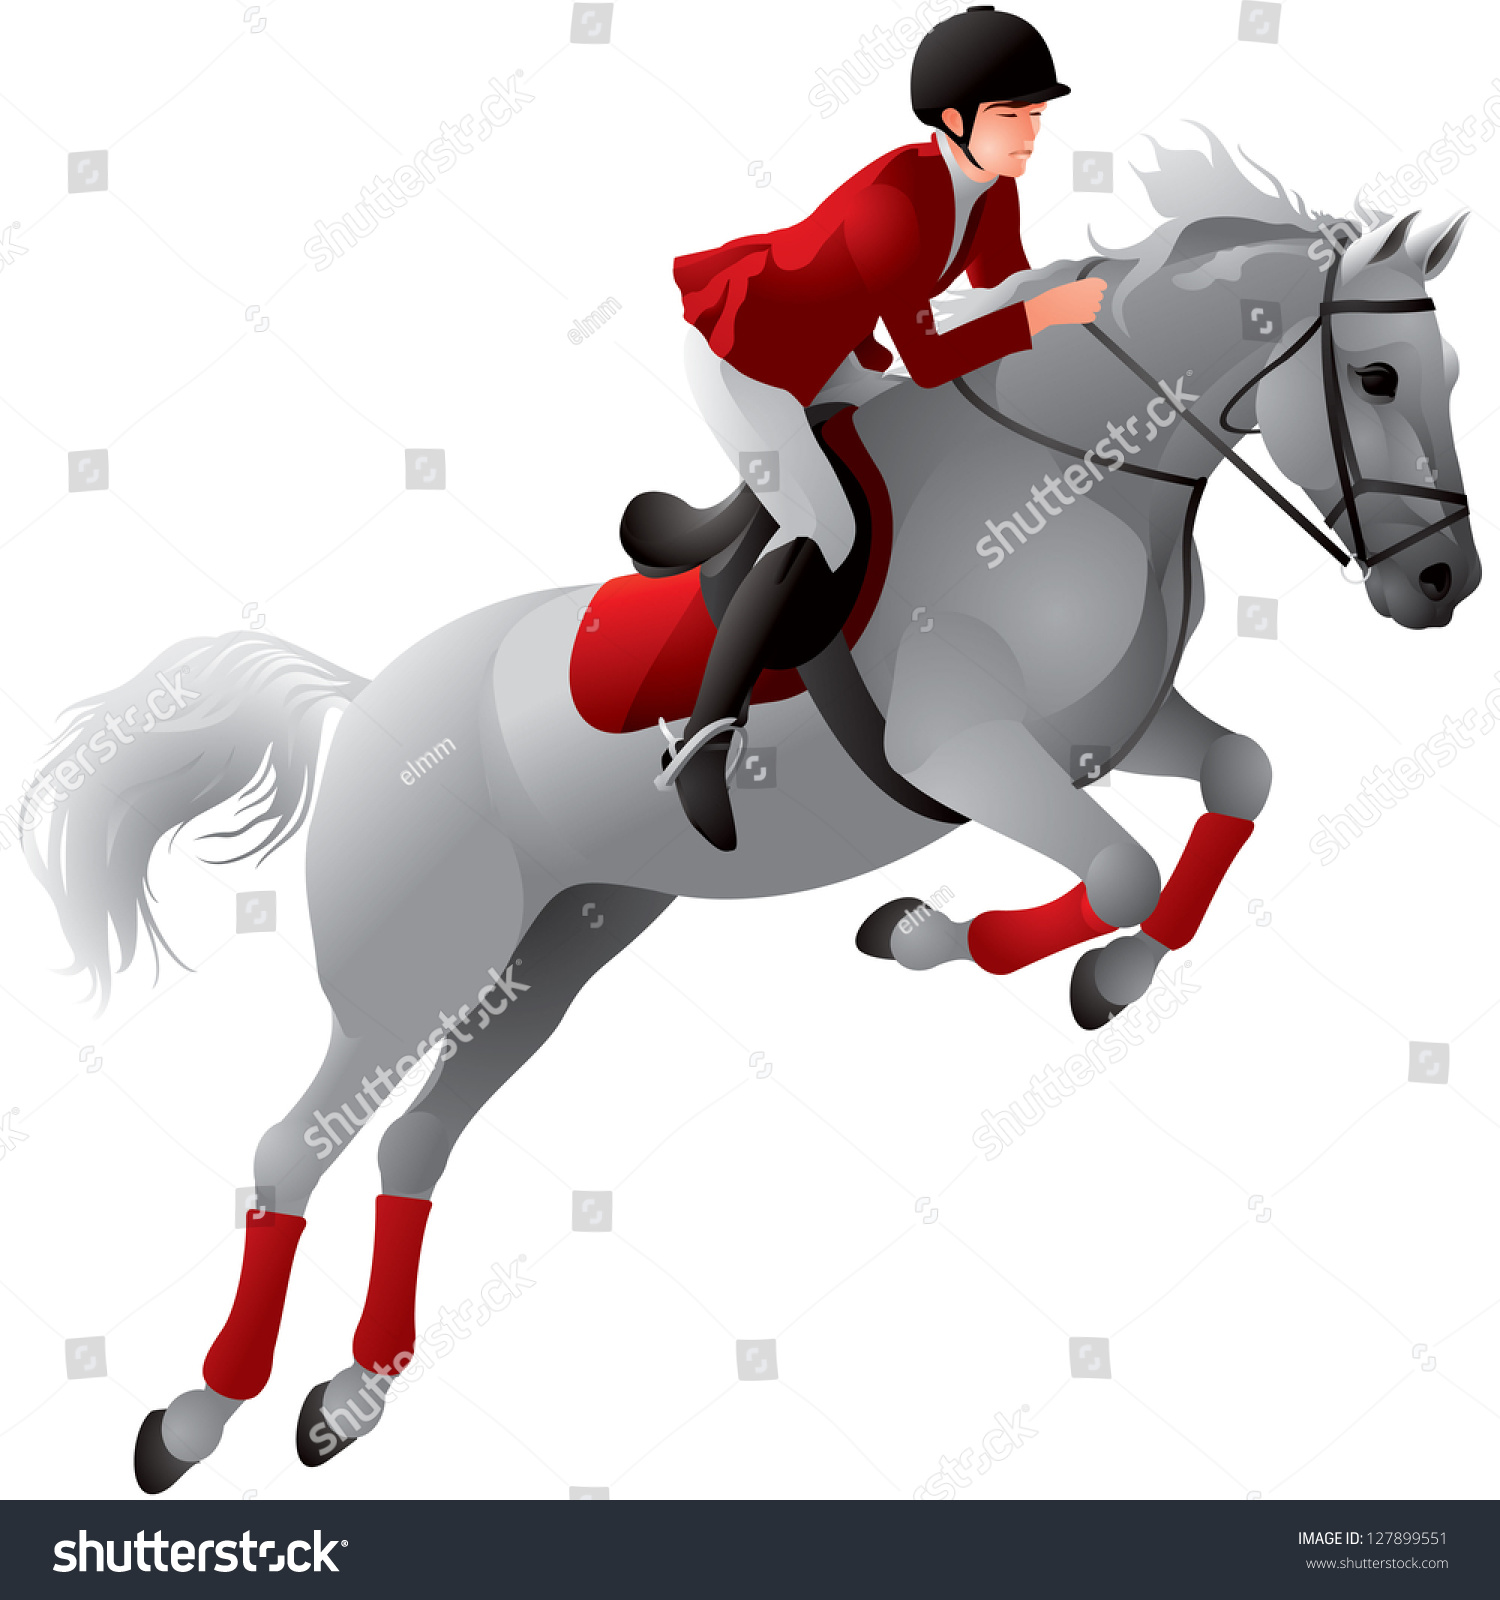 show jumping clipart - photo #12